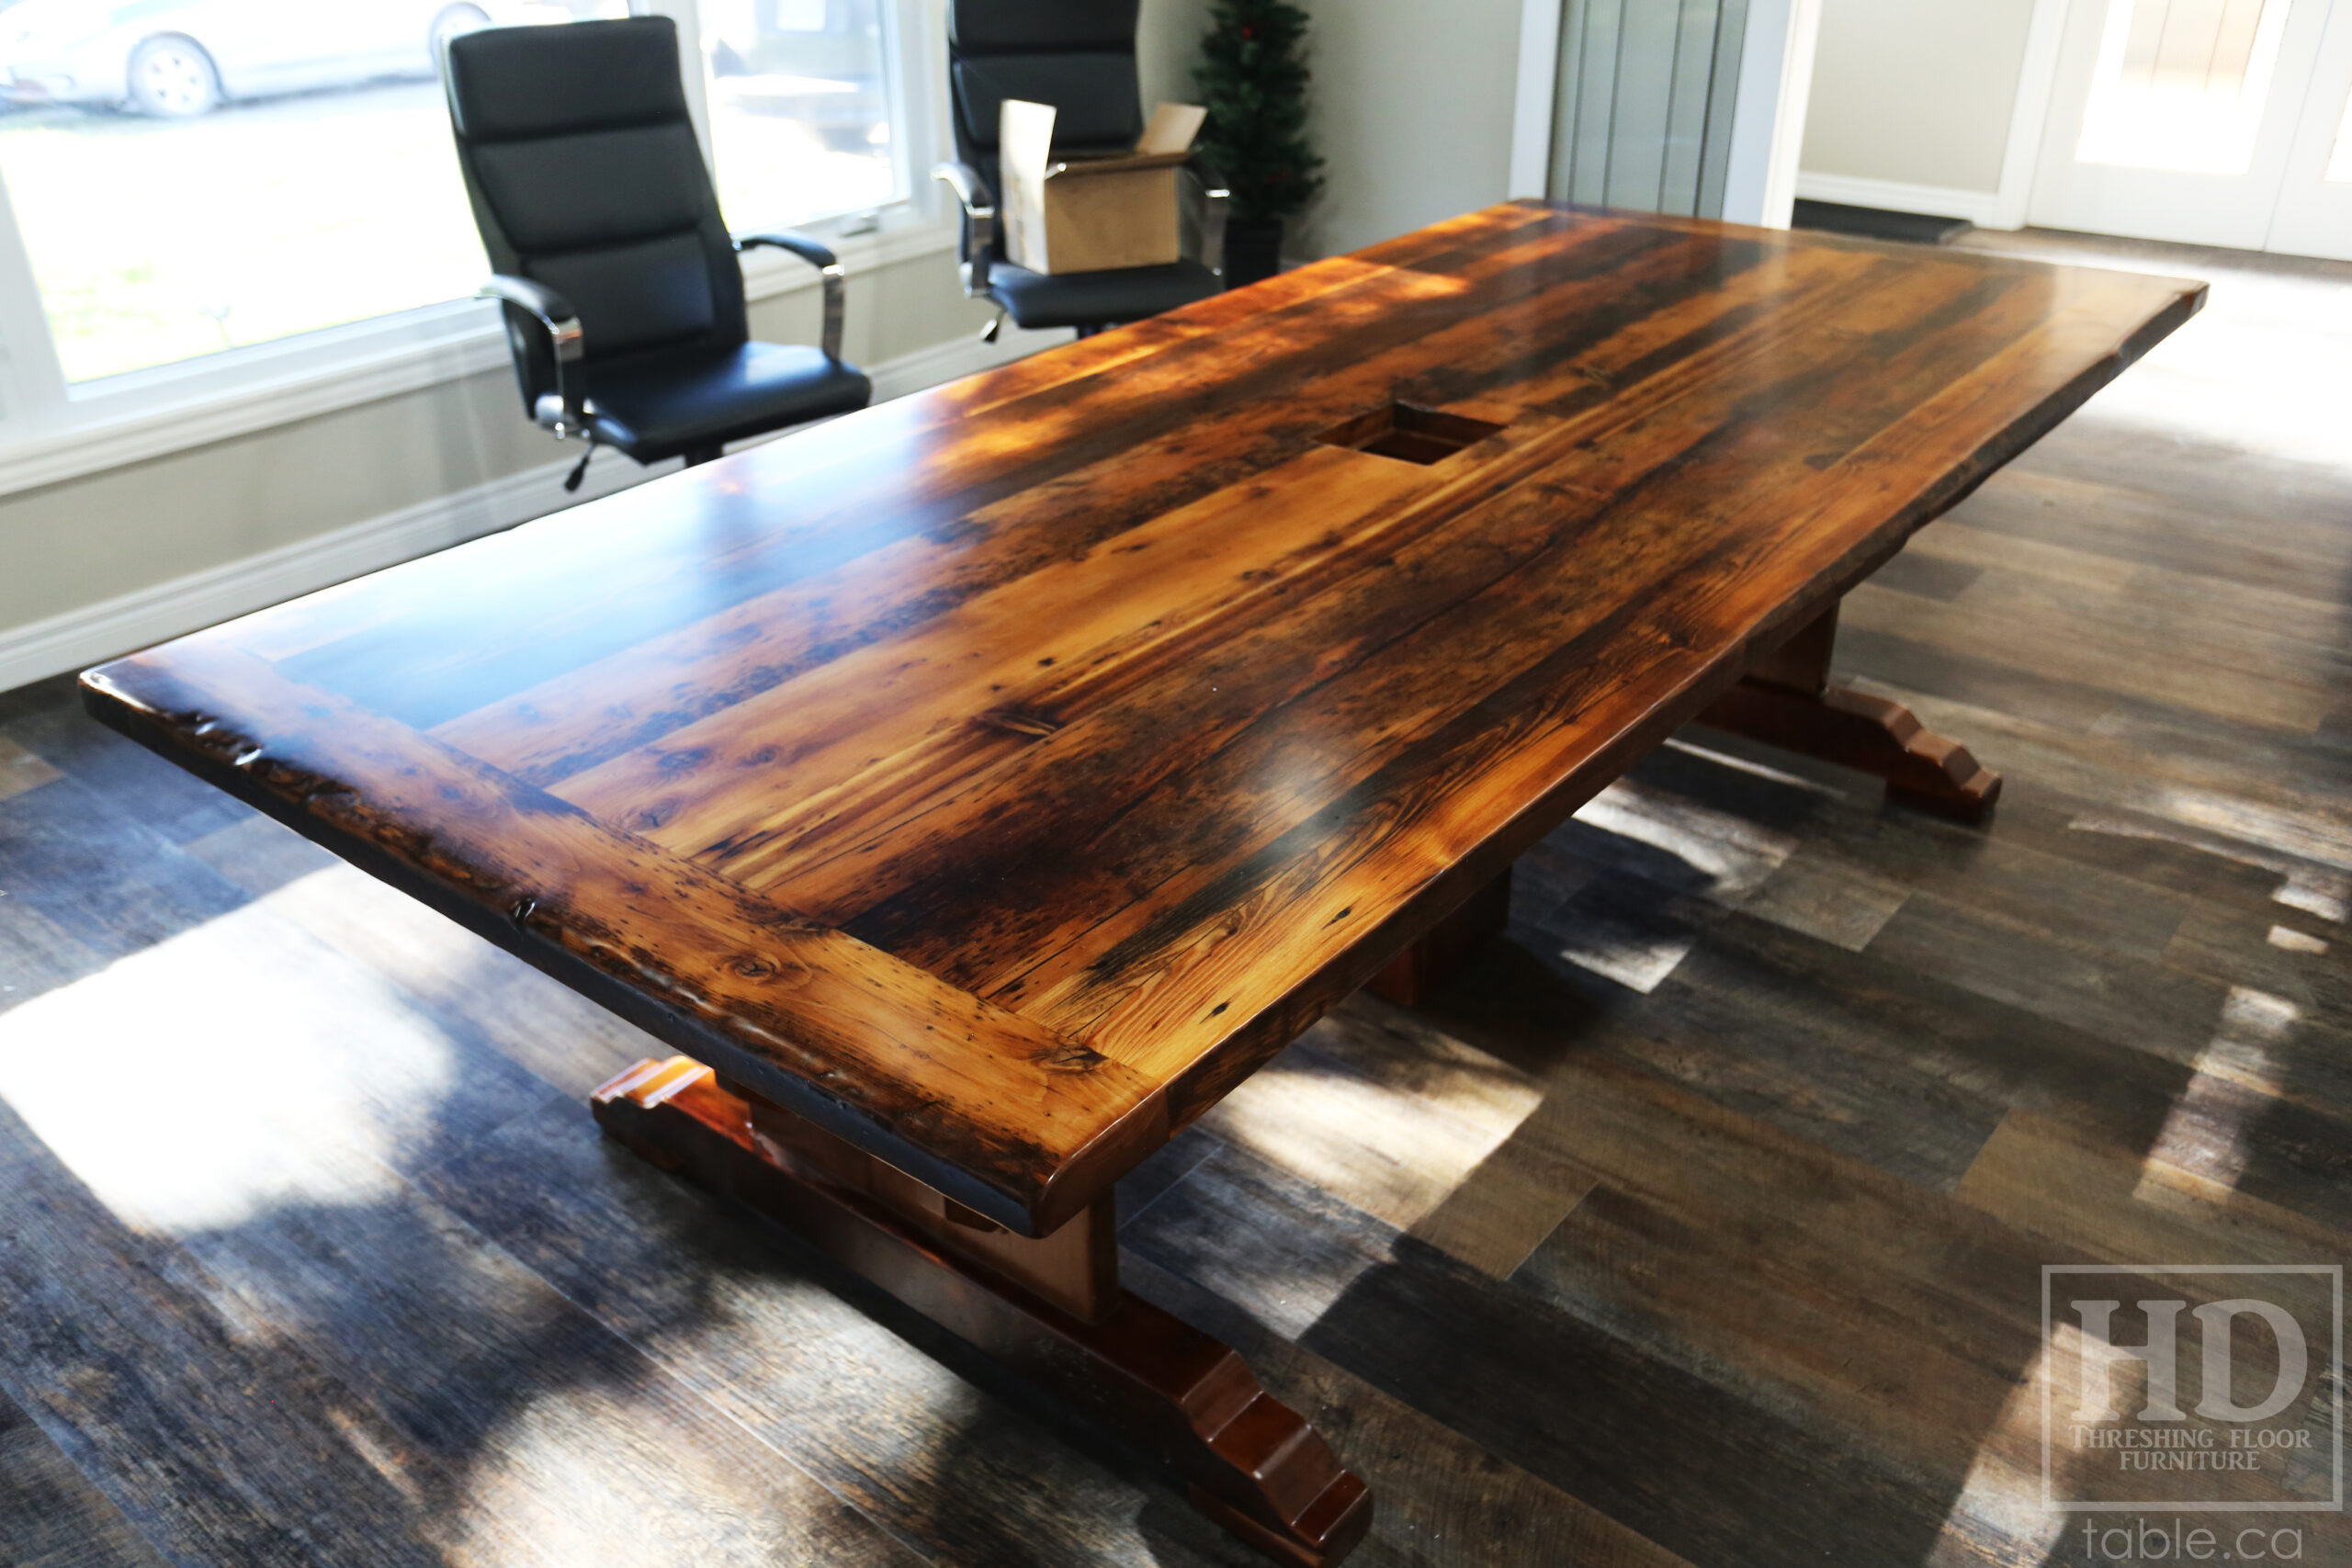 9’ Reclaimed Ontario Barnwood Boardroom Table we made for a Simcoe, Ontario home – 48” wide – Trestle Base with Curved Profile Foot Option – Reclaimed Hemlock Threshing Floor Construction – Original edges & distressing maintained – Cut out for electronics box - Premium epoxy + satin polyurethane finish – Hand Applied Epoxy on Base Option - www.table.ca